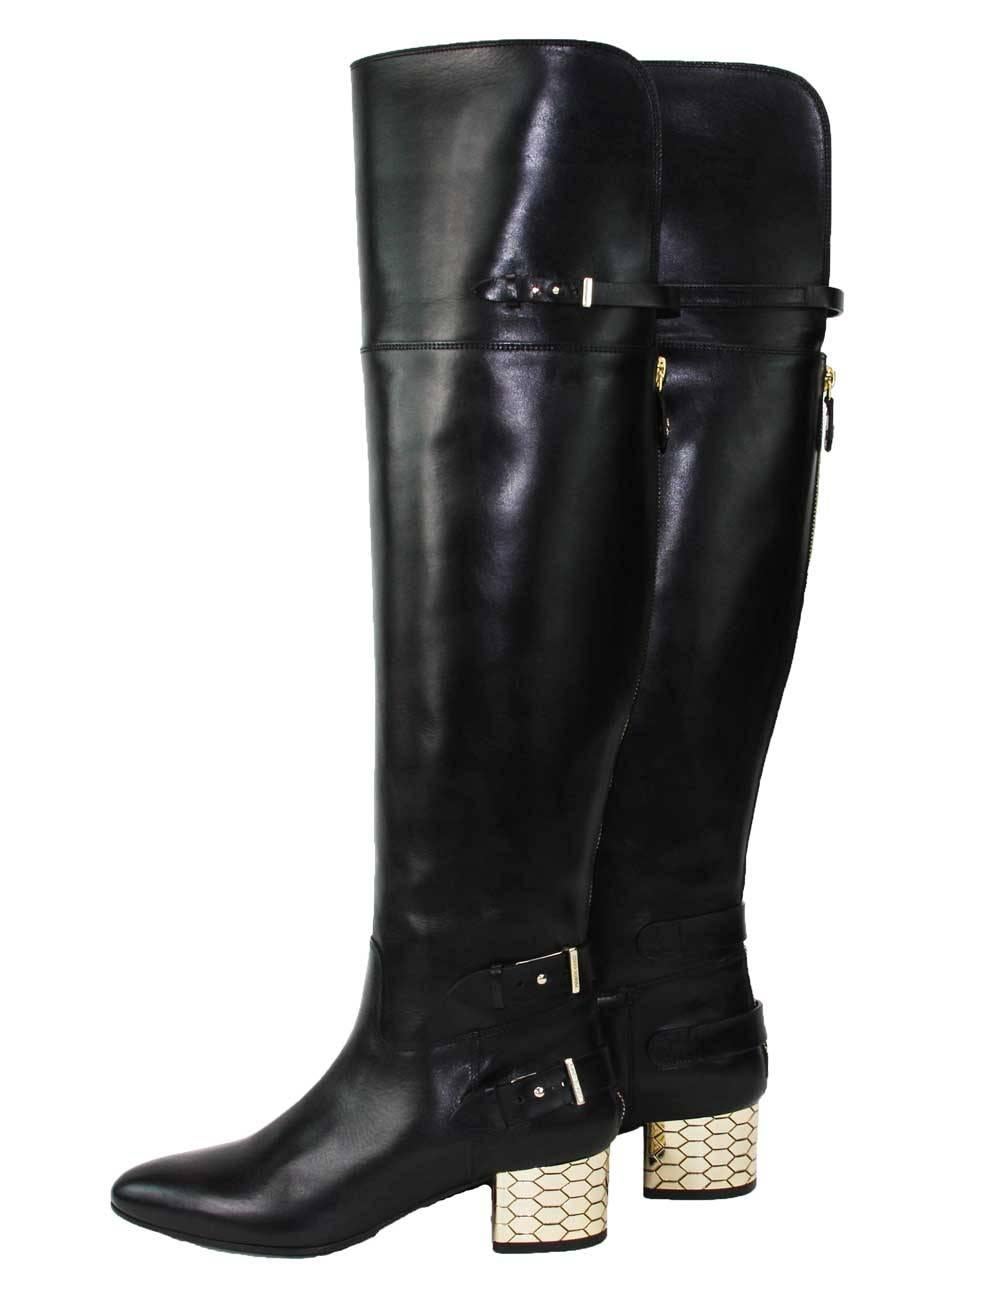 Women's New Roberto Cavalli Over-the-knee Leather Boots Honeycomb Pattern Heel 36.5  6.5 For Sale